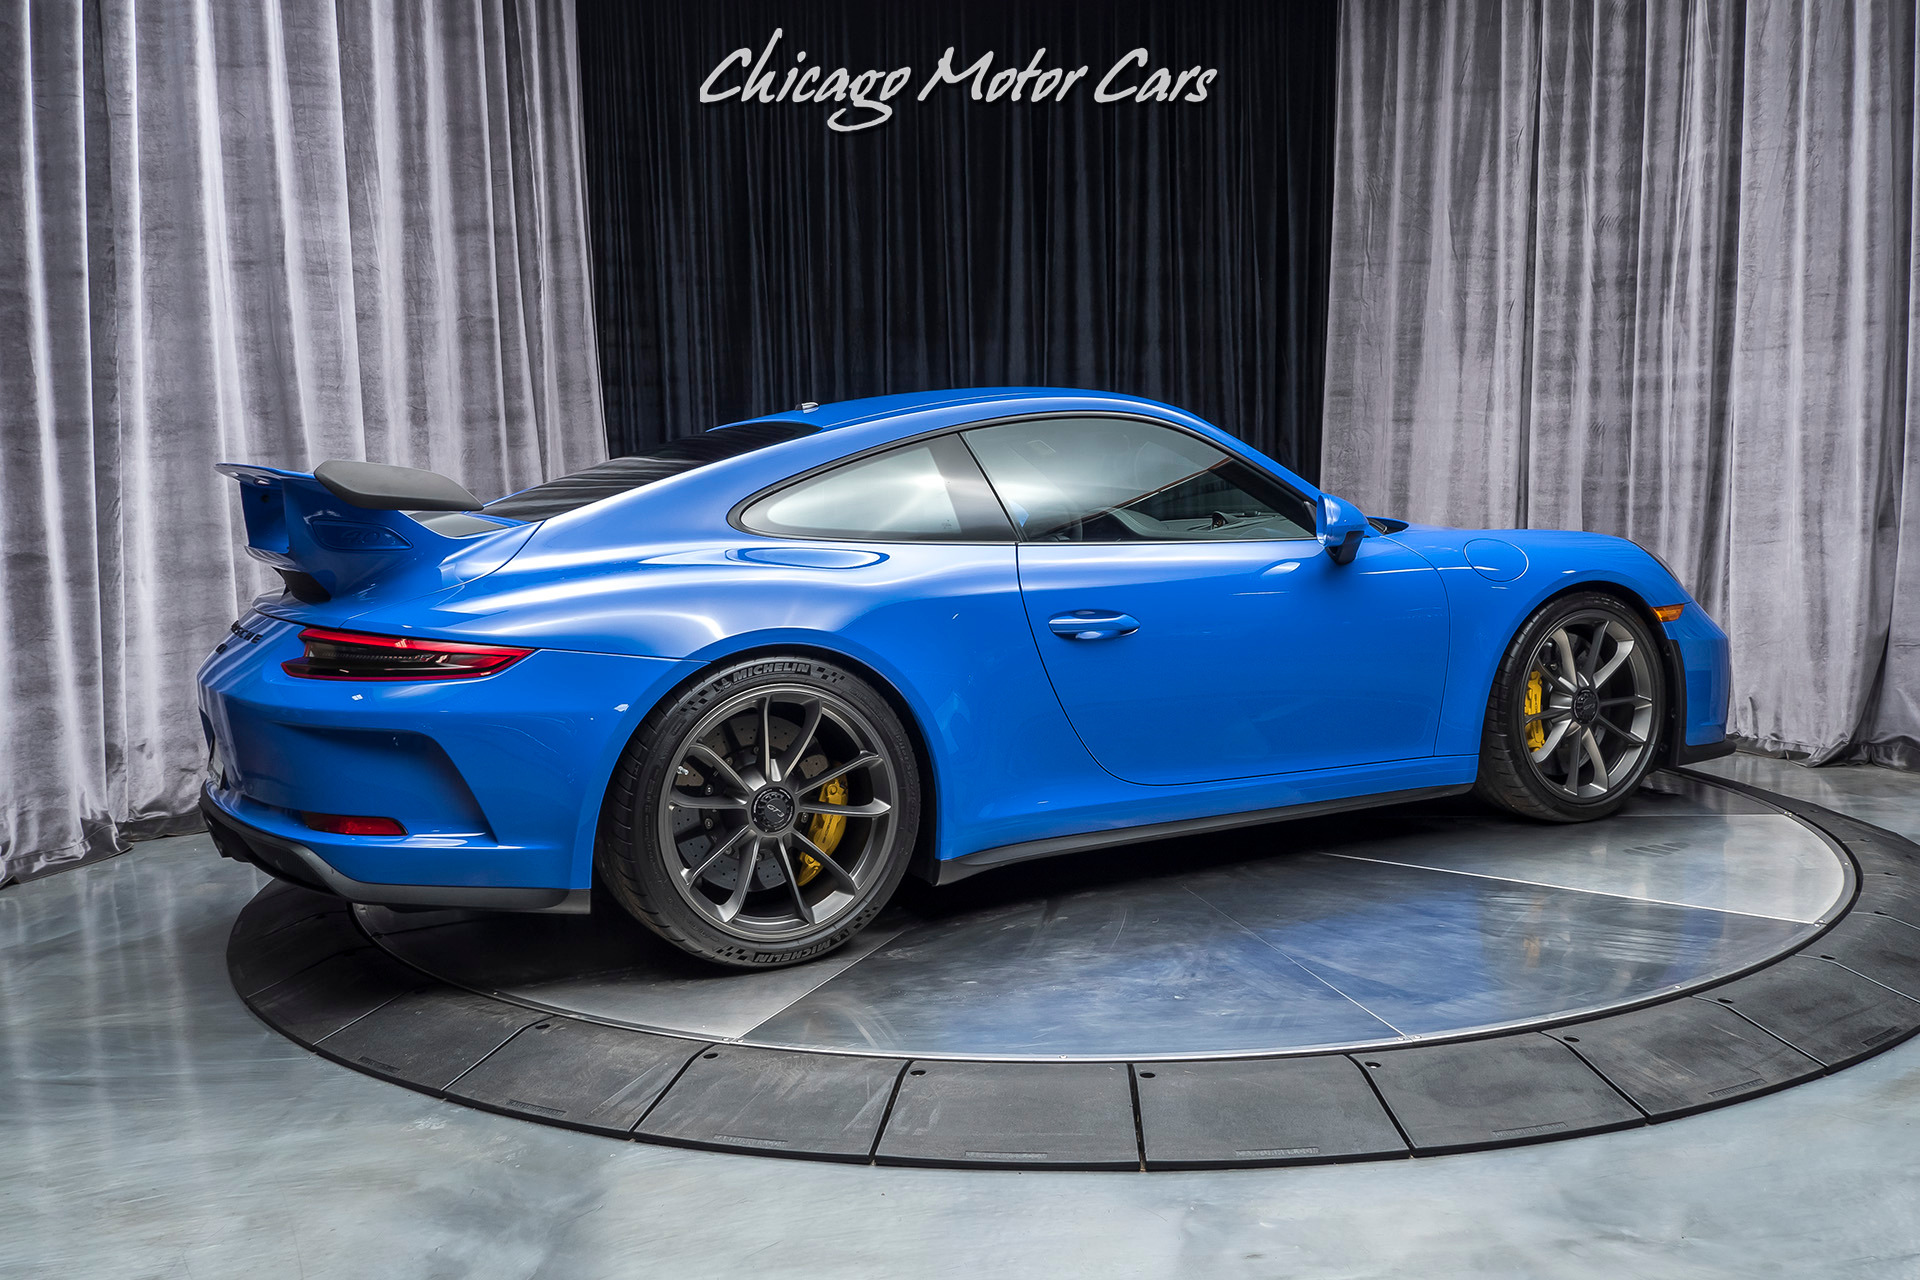 Used-2018-Porsche-911-GT3-Coupe-6-Speed-Manual-MSRP-192640-RARE-PTS-Maritime-Blue